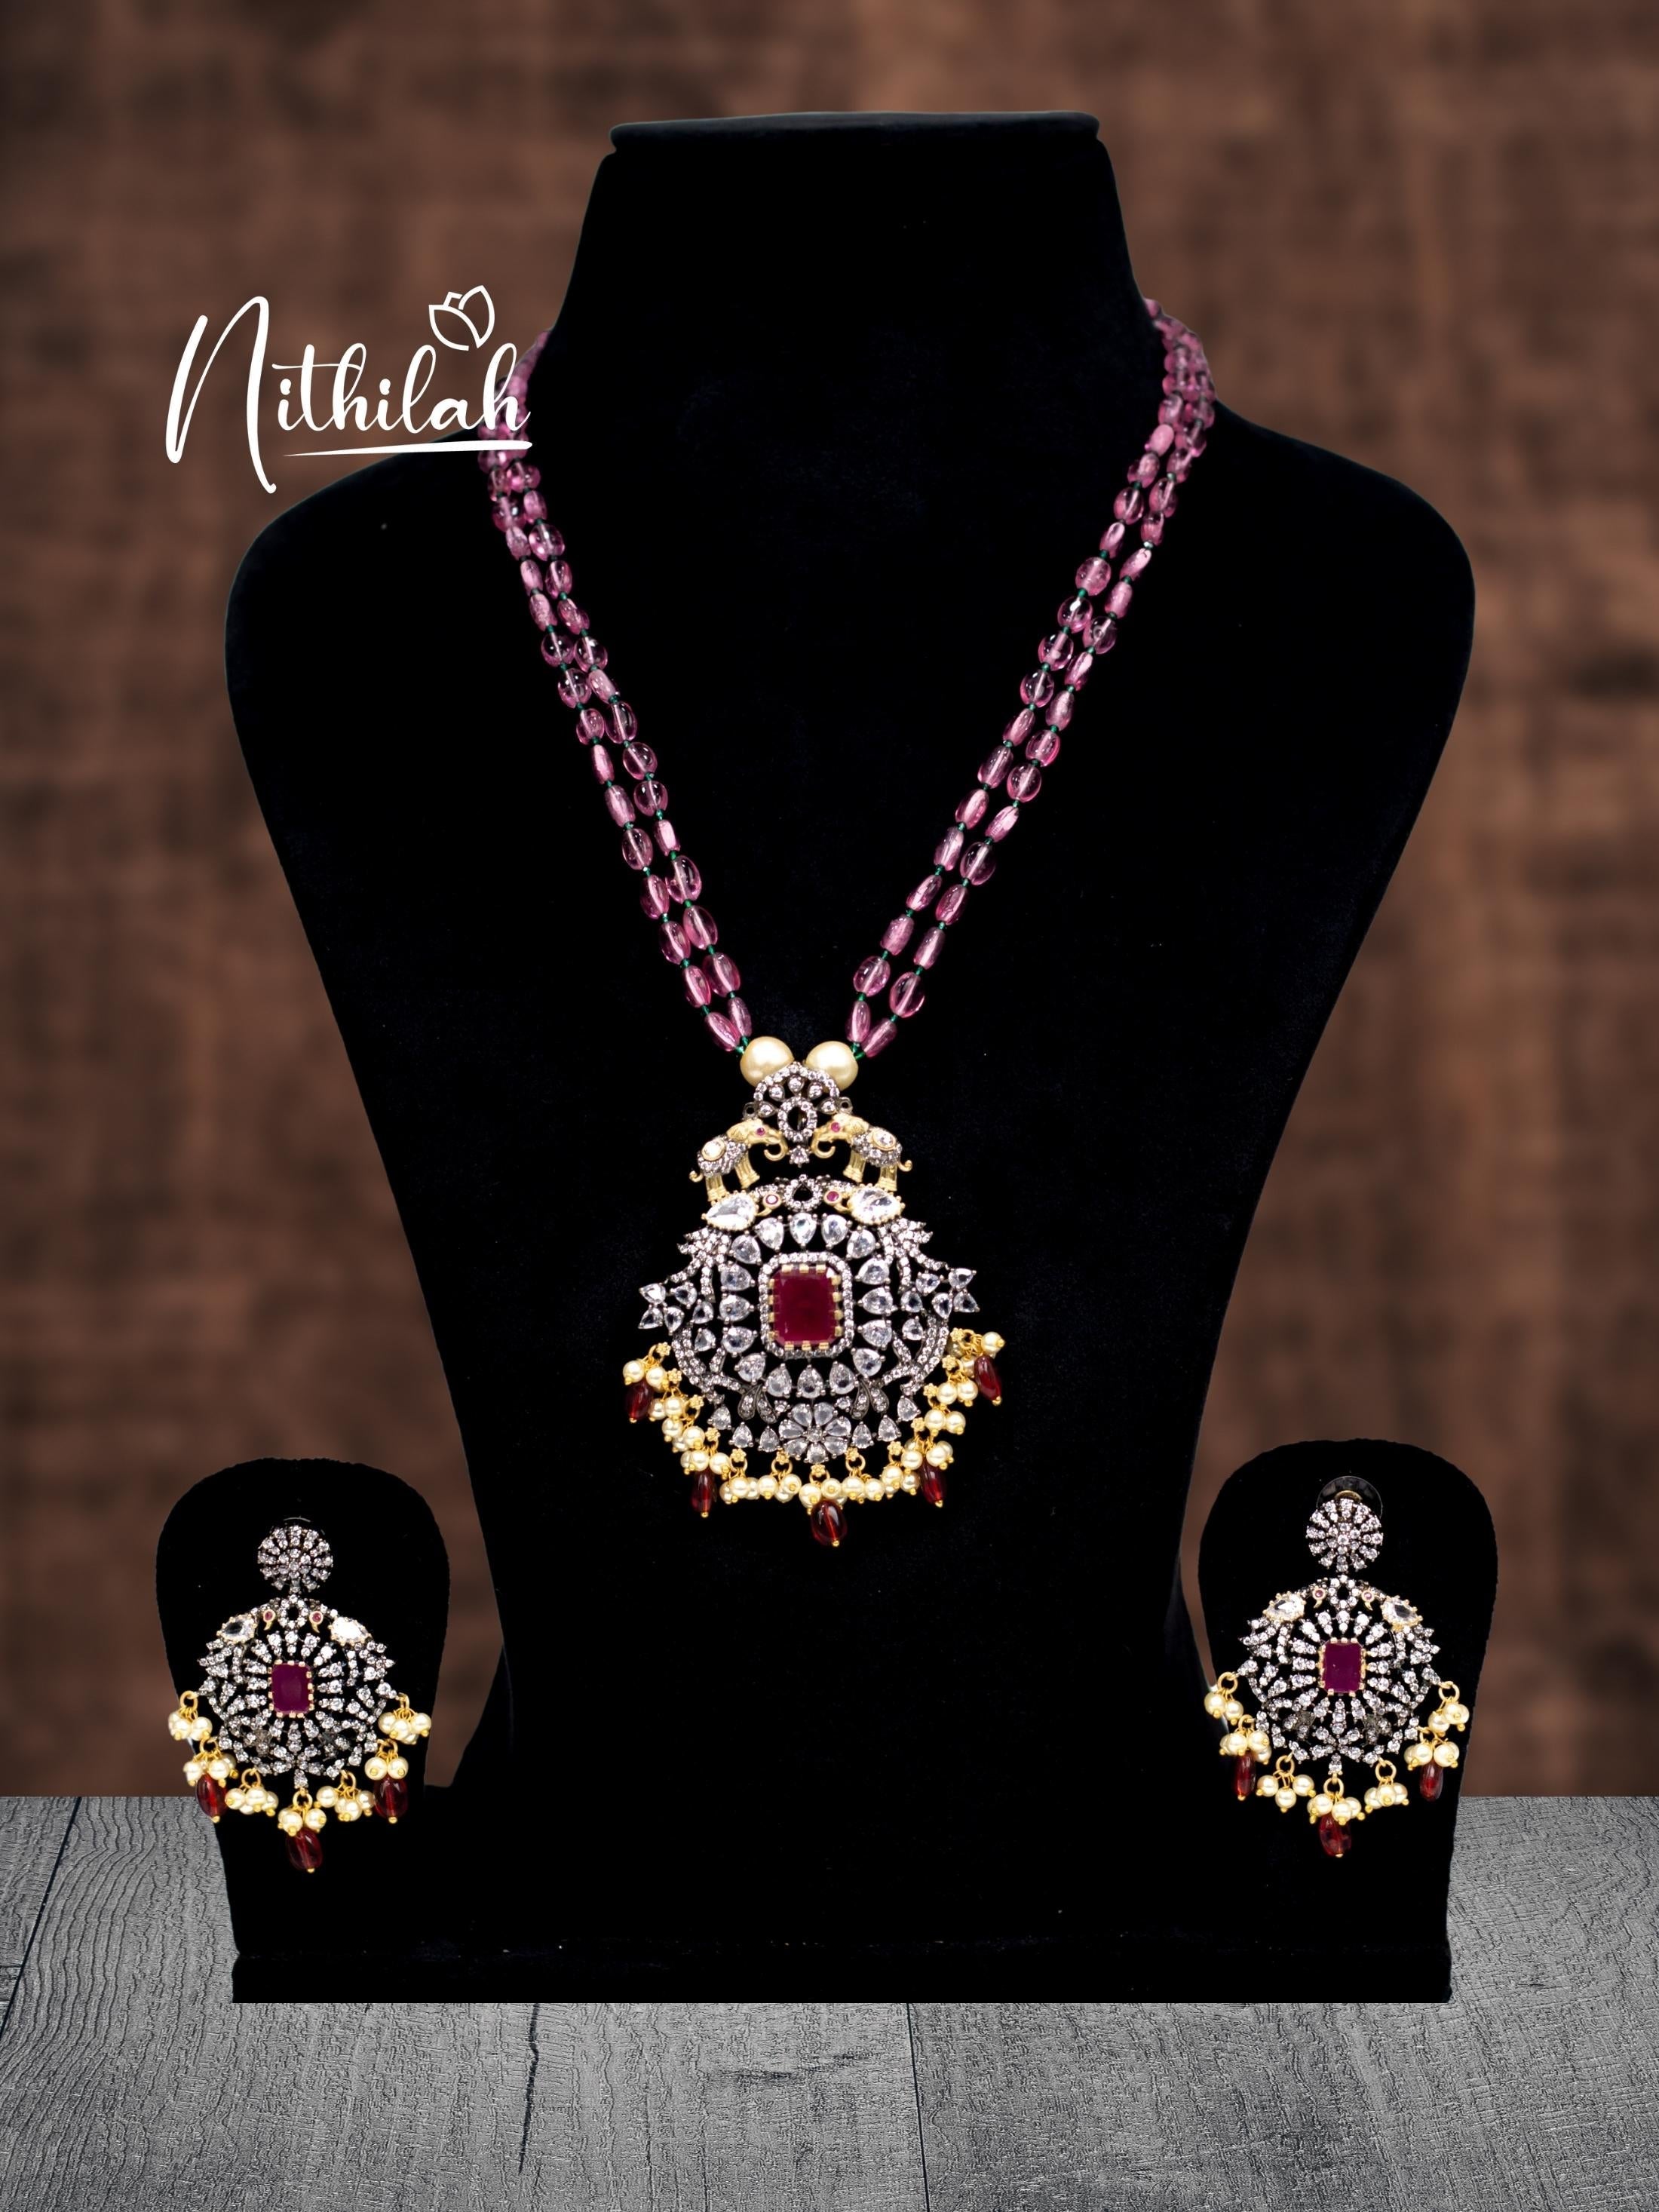 Buy Imitation Jewellery Pink Mosanite Beads Victorian Necklace 2 NCPN113 Online